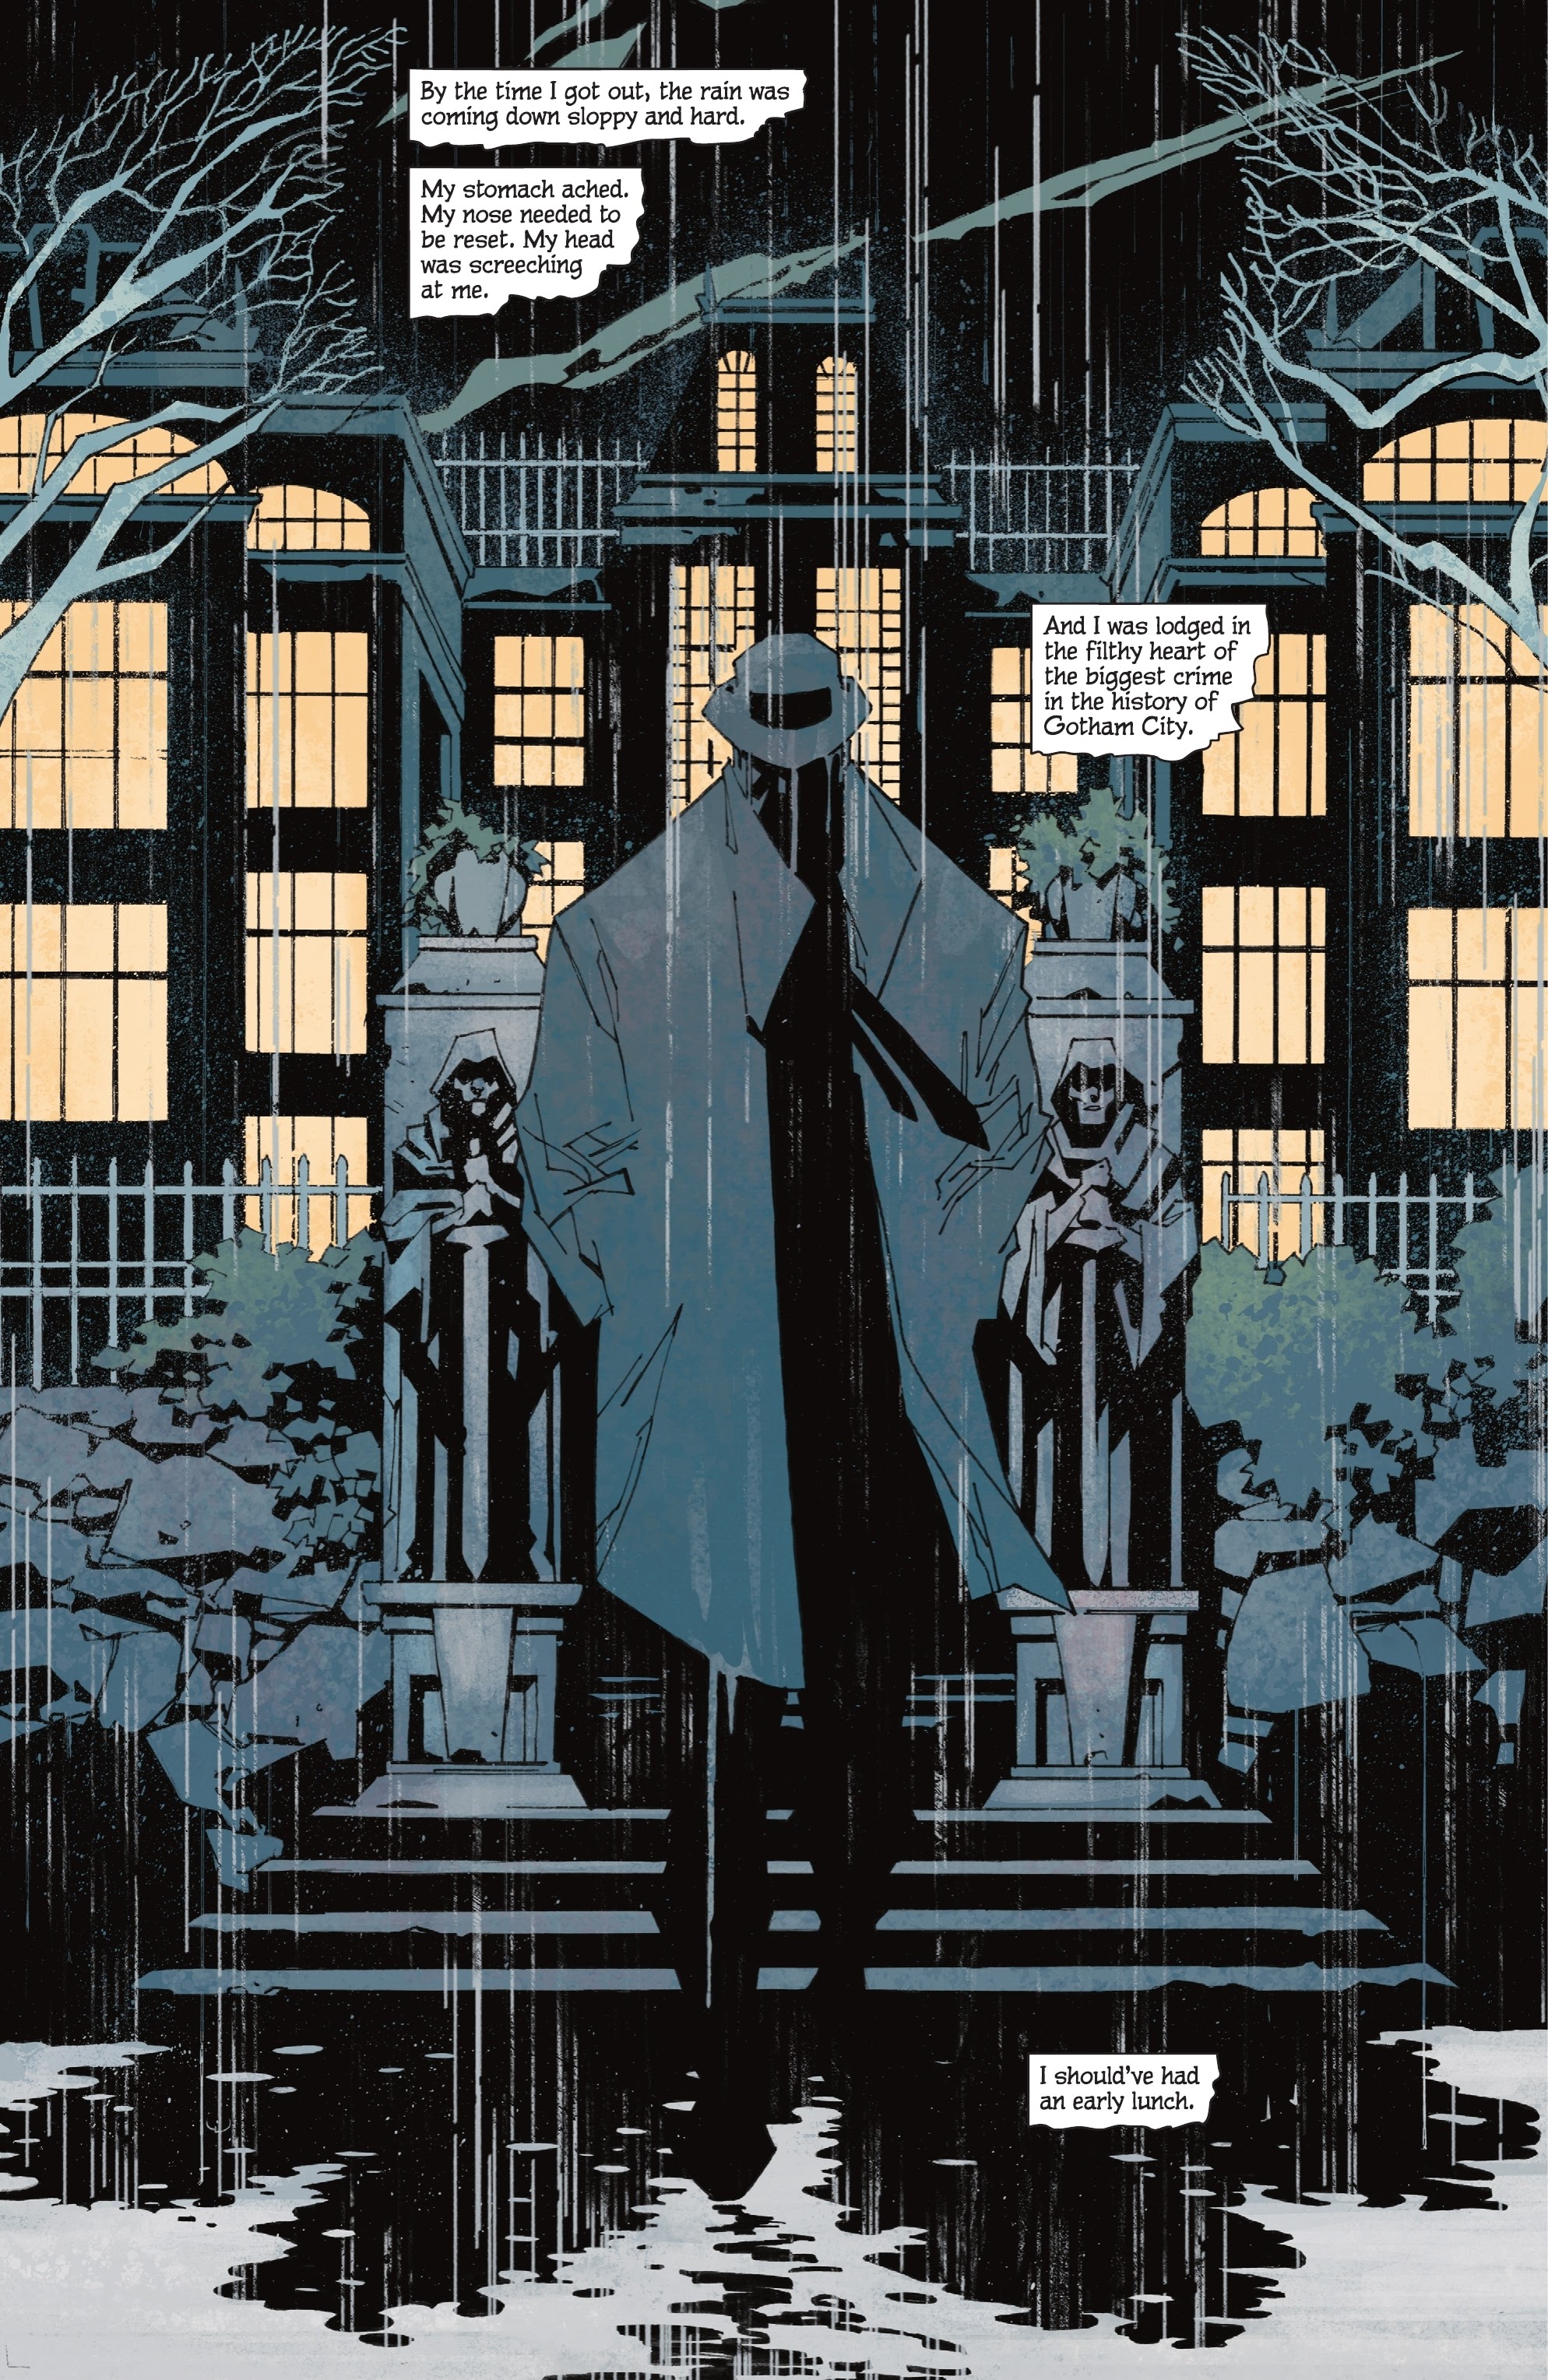 Read online Gotham City: Year One comic -  Issue #1 - 26